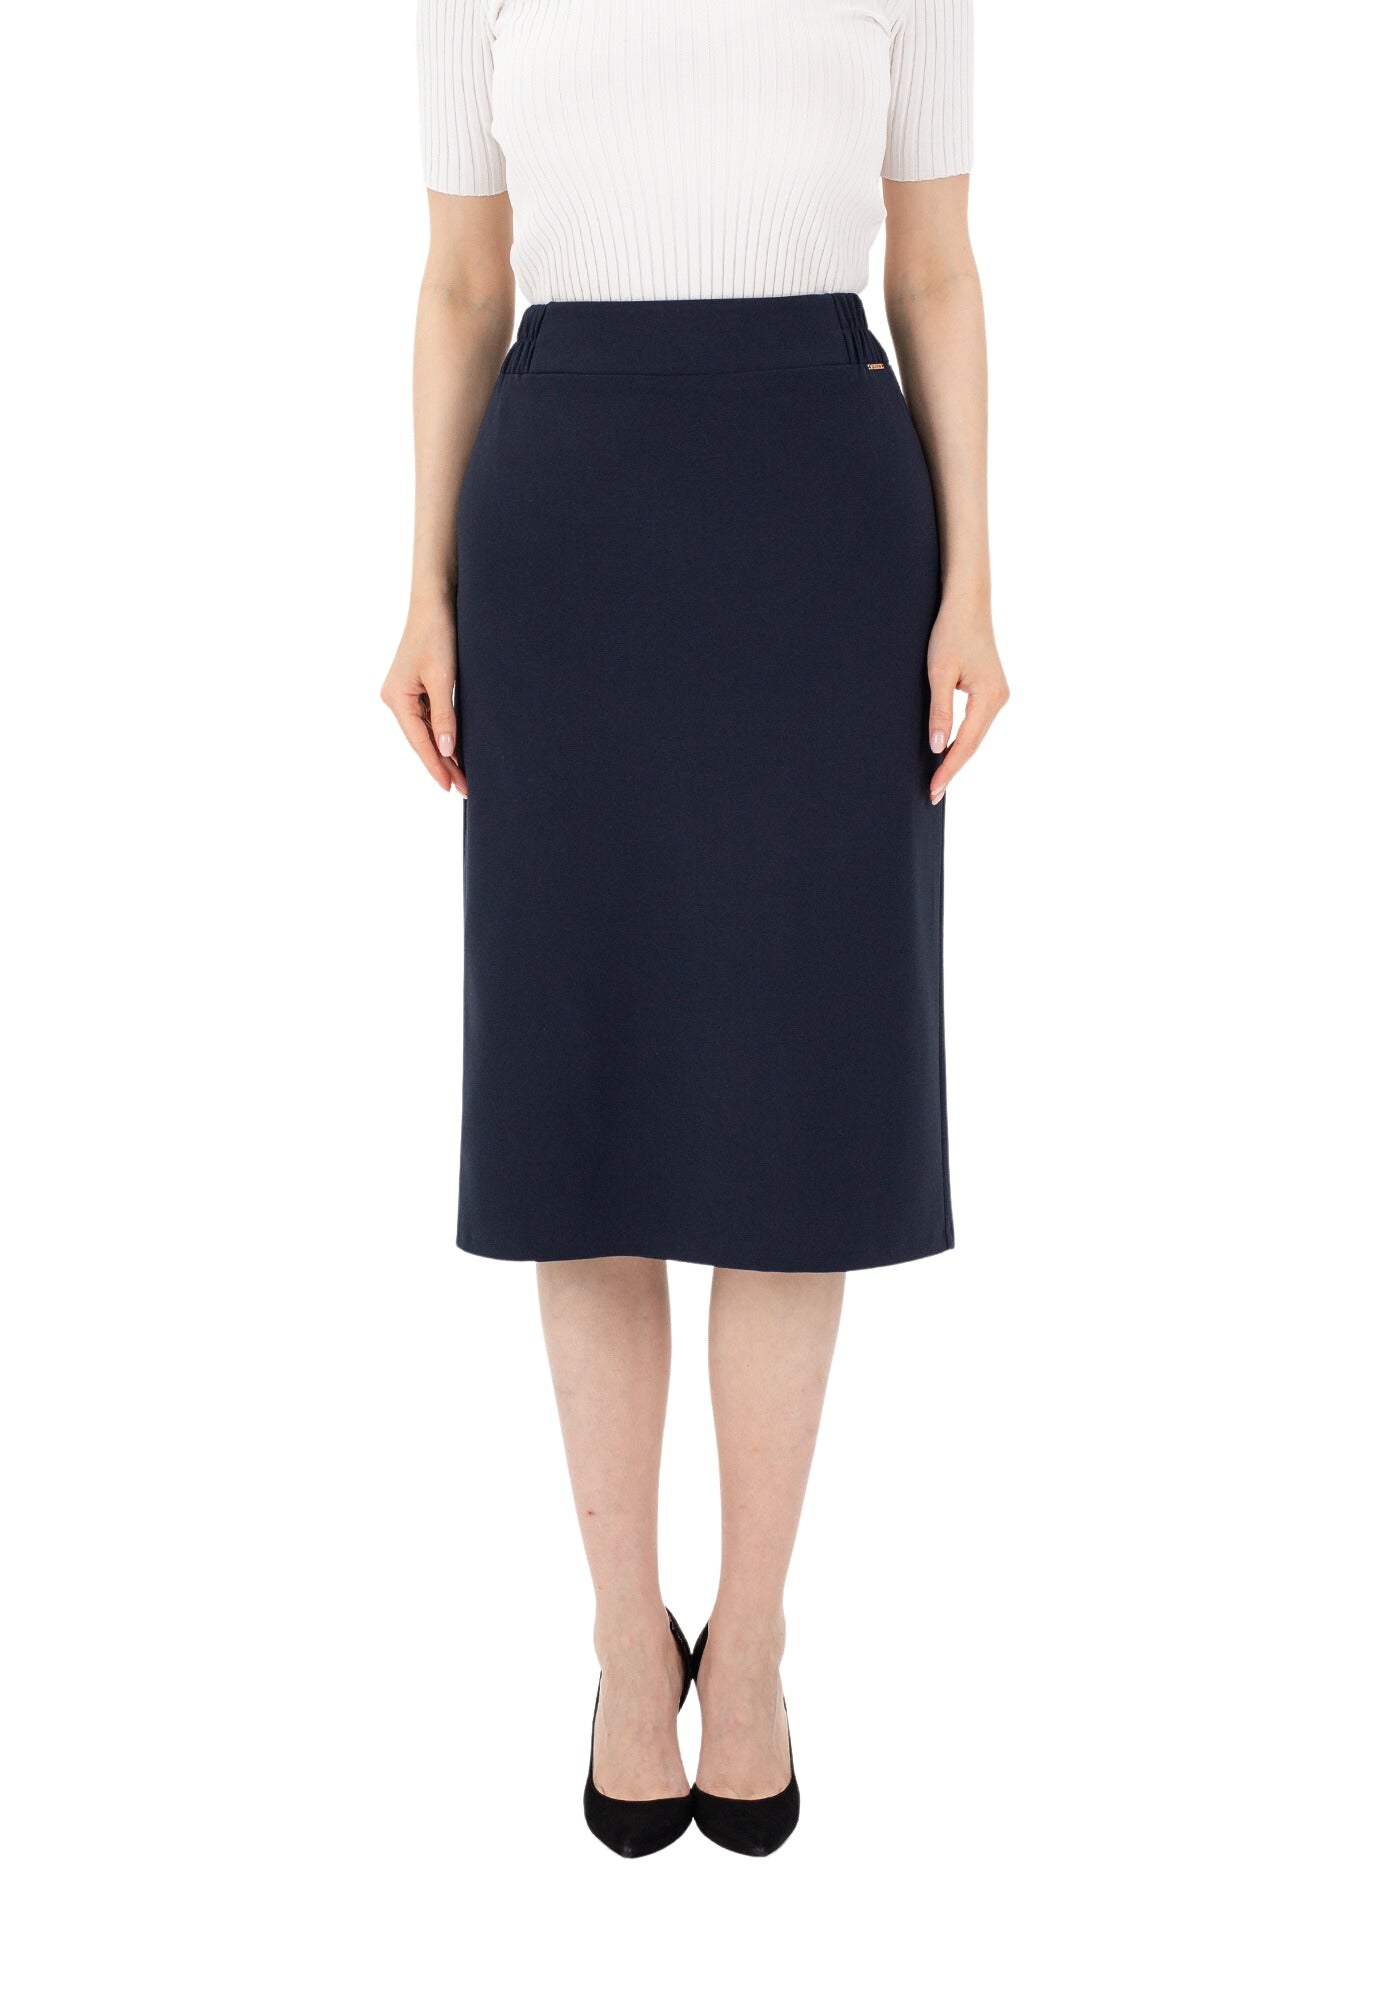 Navy Blue Midi Pencil Skirt with Elastic Waist and Closed Back Vent G-Line